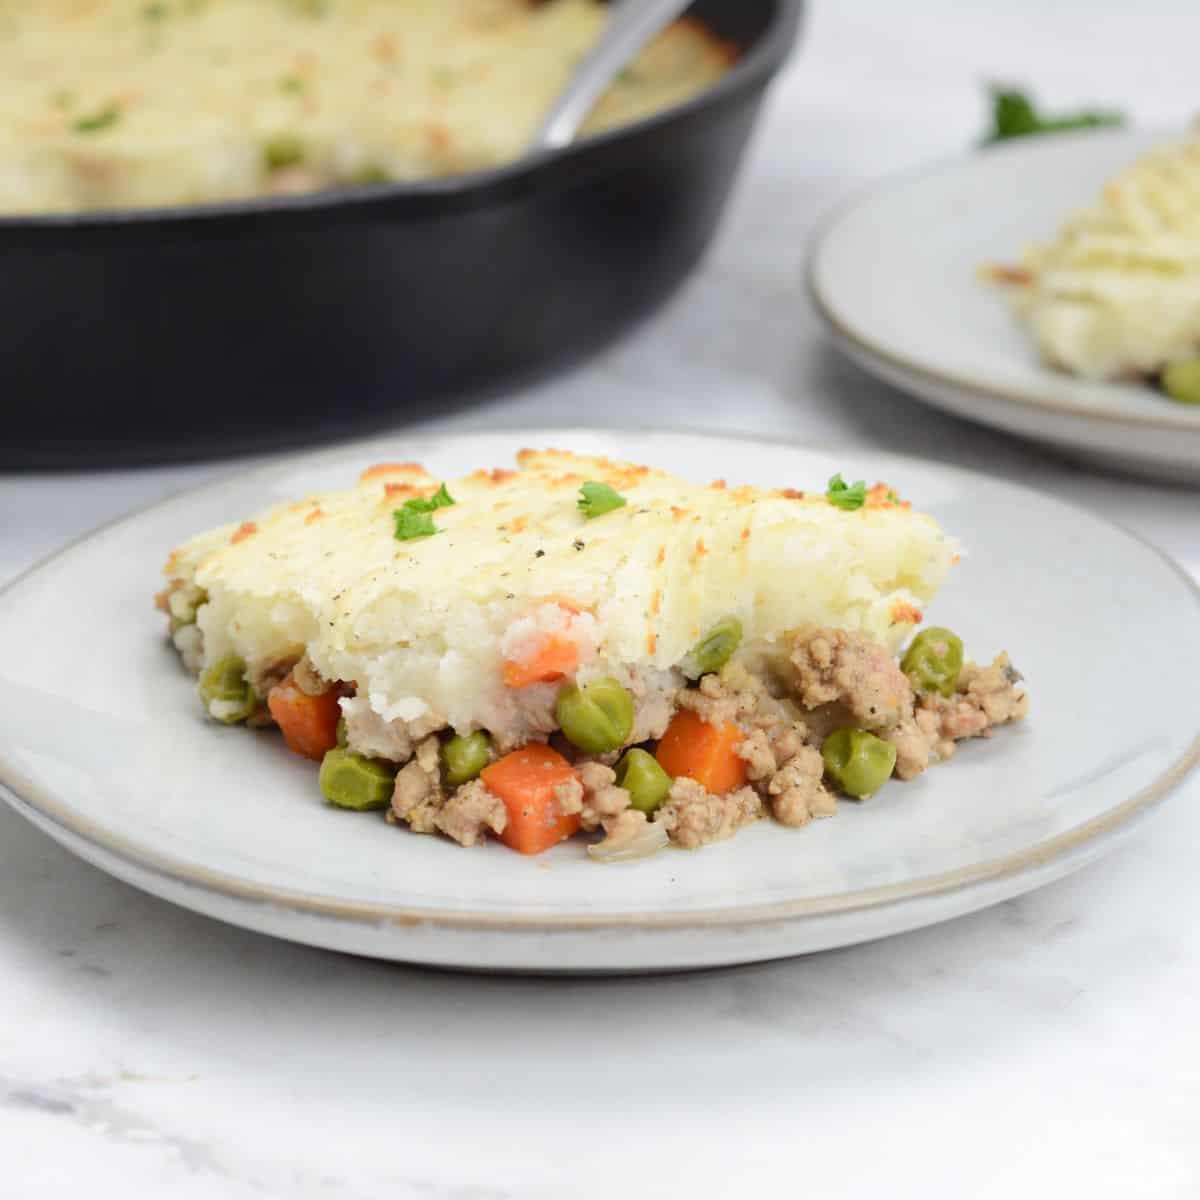 Close up of single serving of Turkey Shepherd's Pie.  A skillet and small plate with another serving sit behind. 